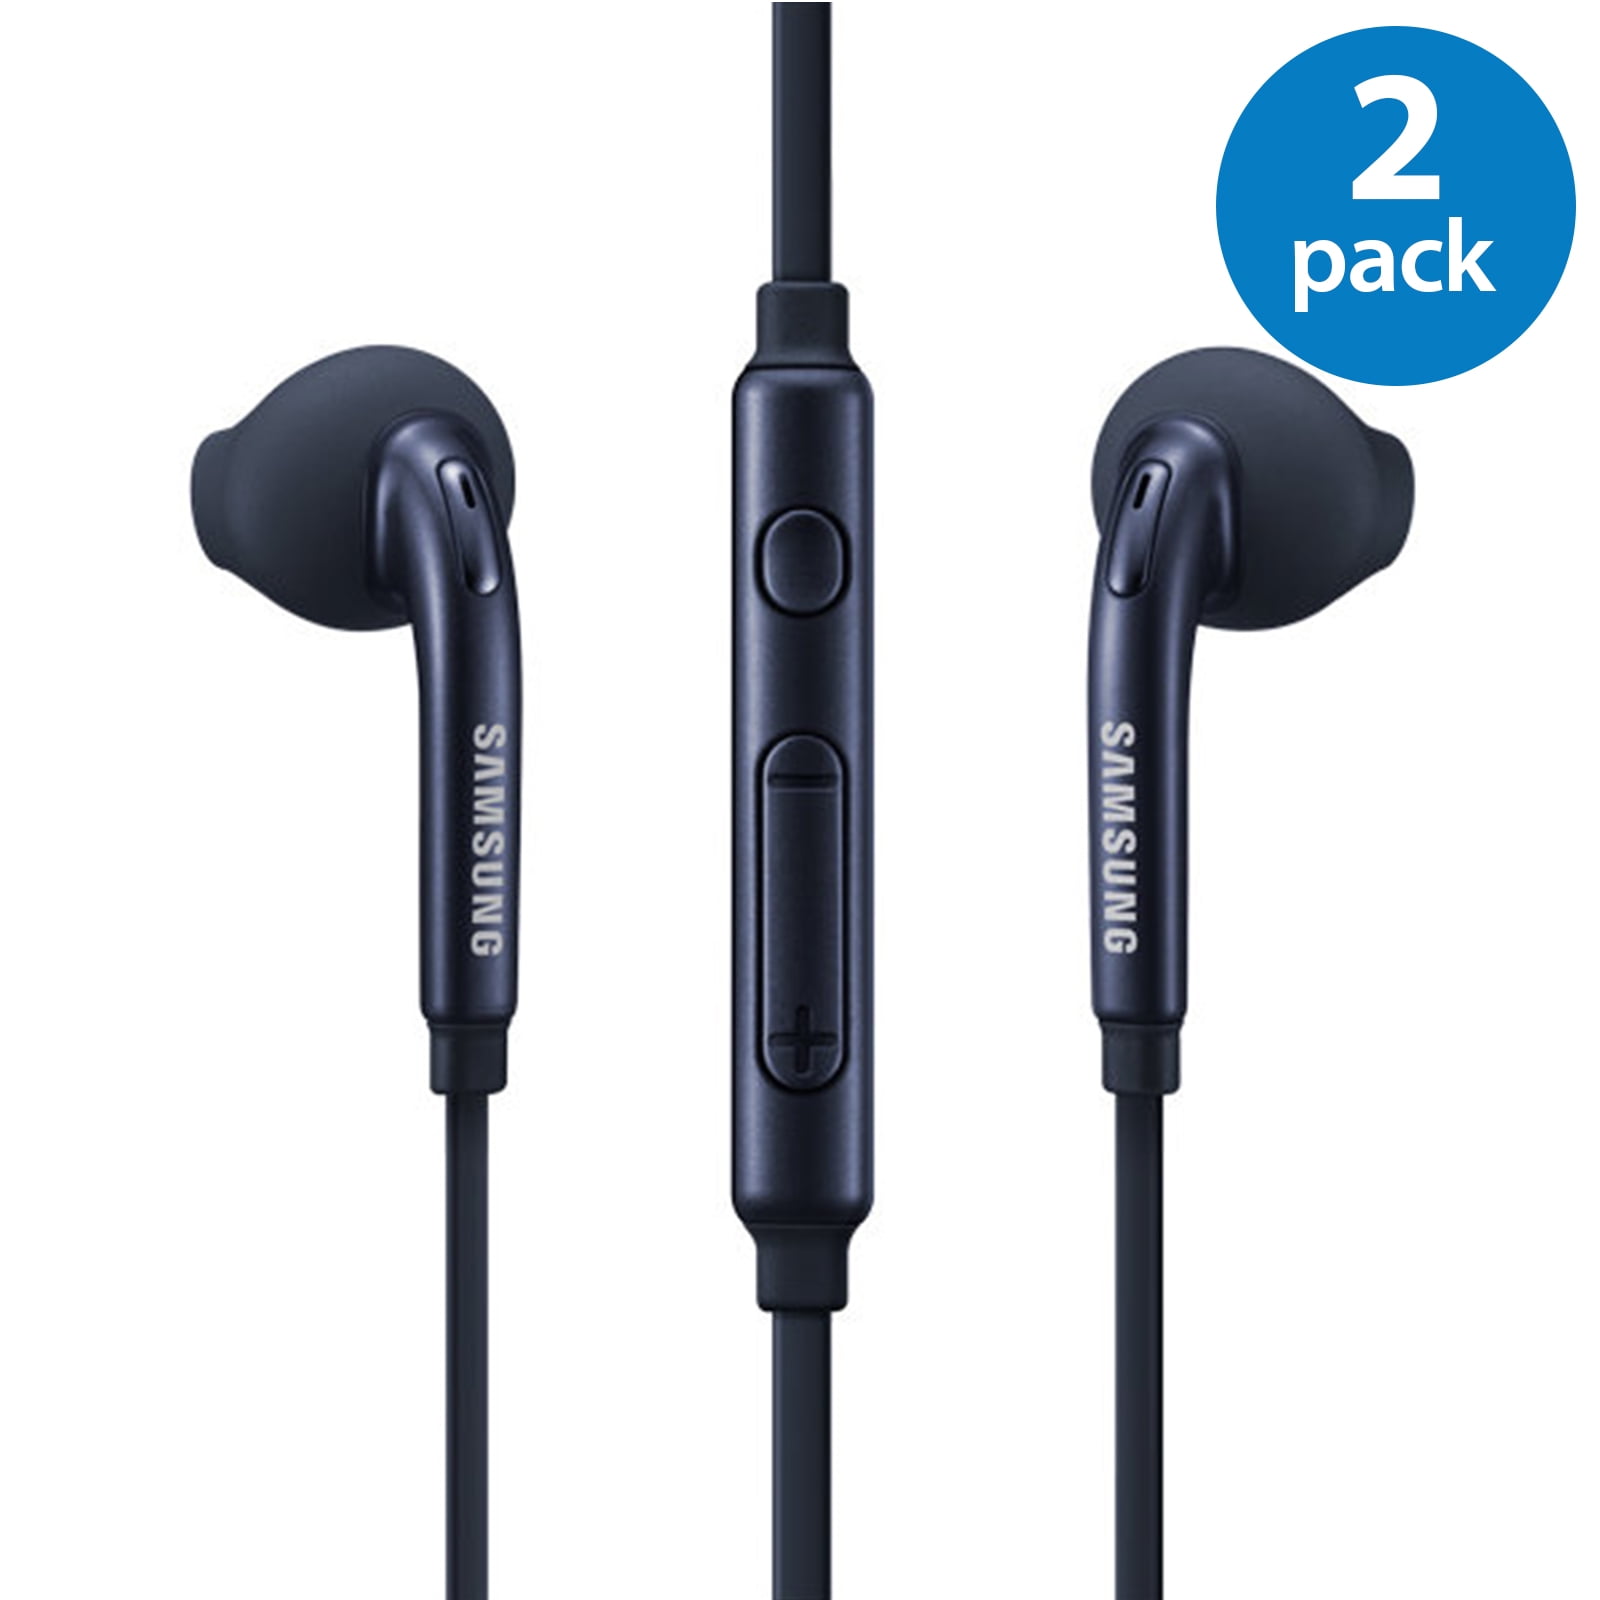 2 Pack of OEM Original Earbud Earphone Headset Headphones With Remote for Samsung Galaxy S6 edge S7 edge S8 S9 S8+ S9+ Plus EO-EG920LW black sold by Afflux